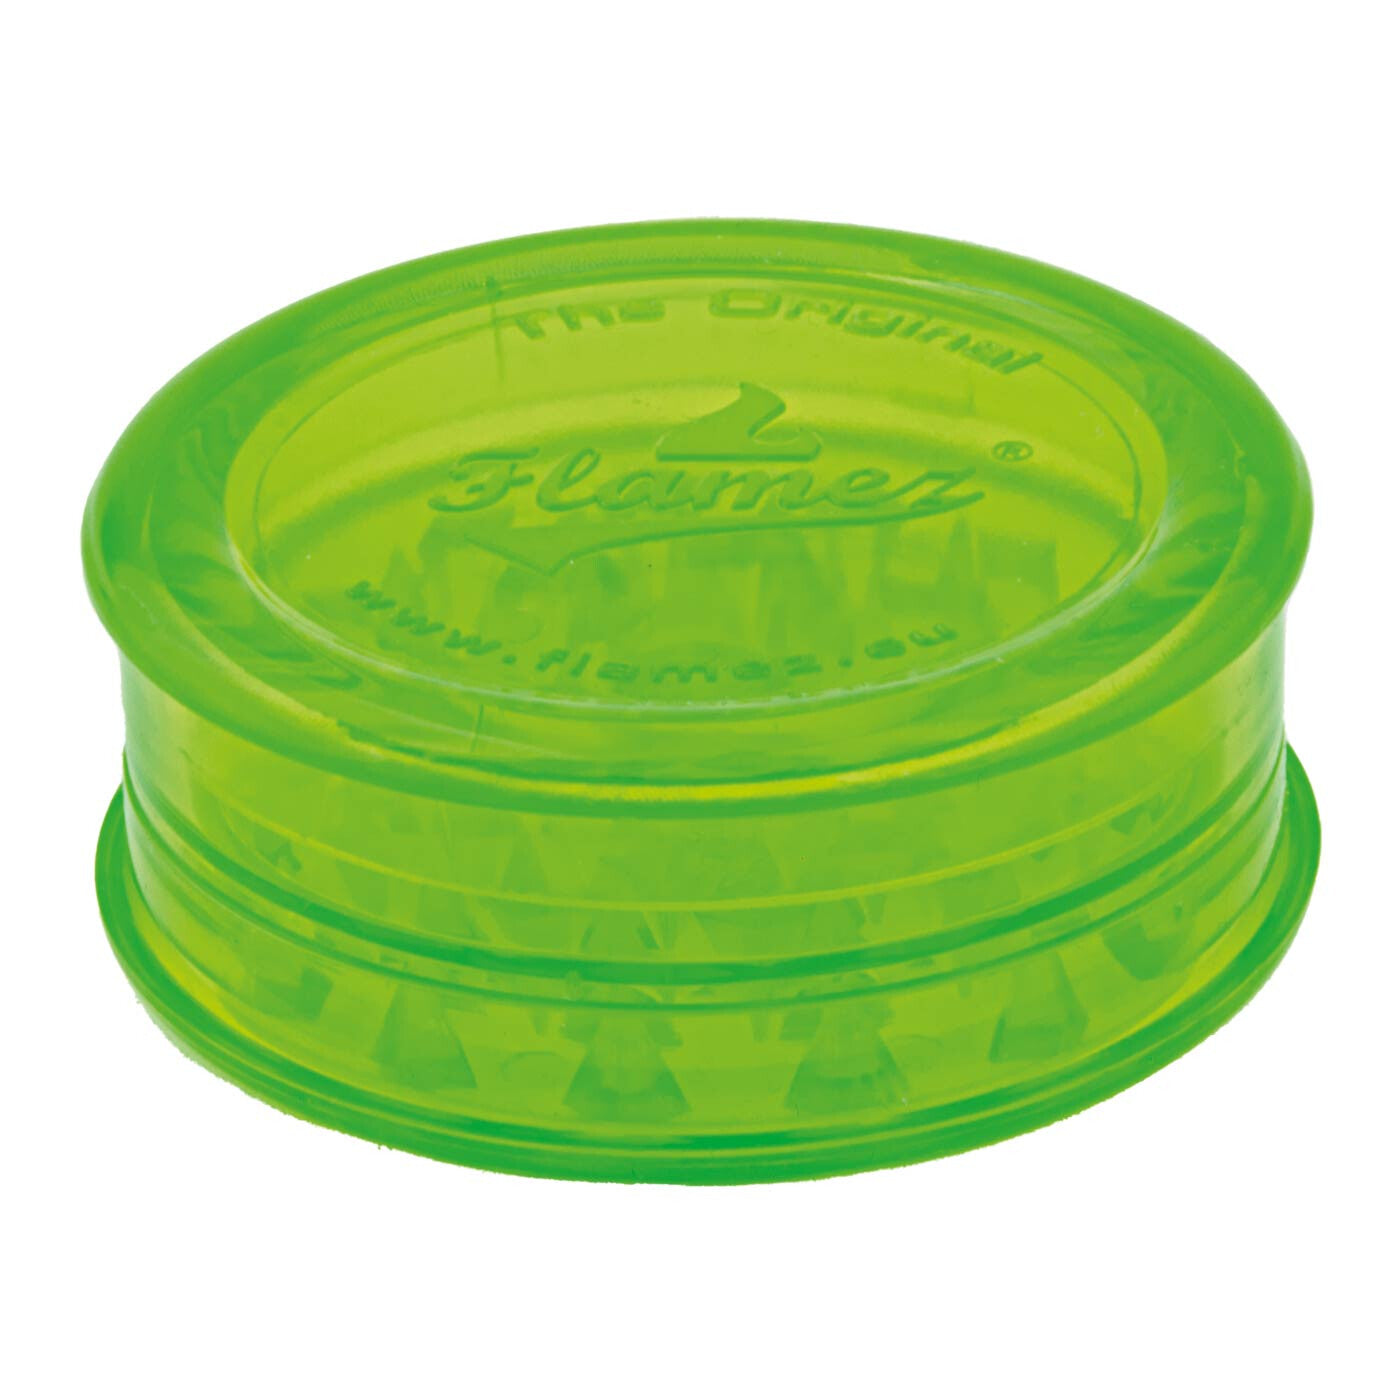 Acrylic Super Grinder With Stash Compartment Green